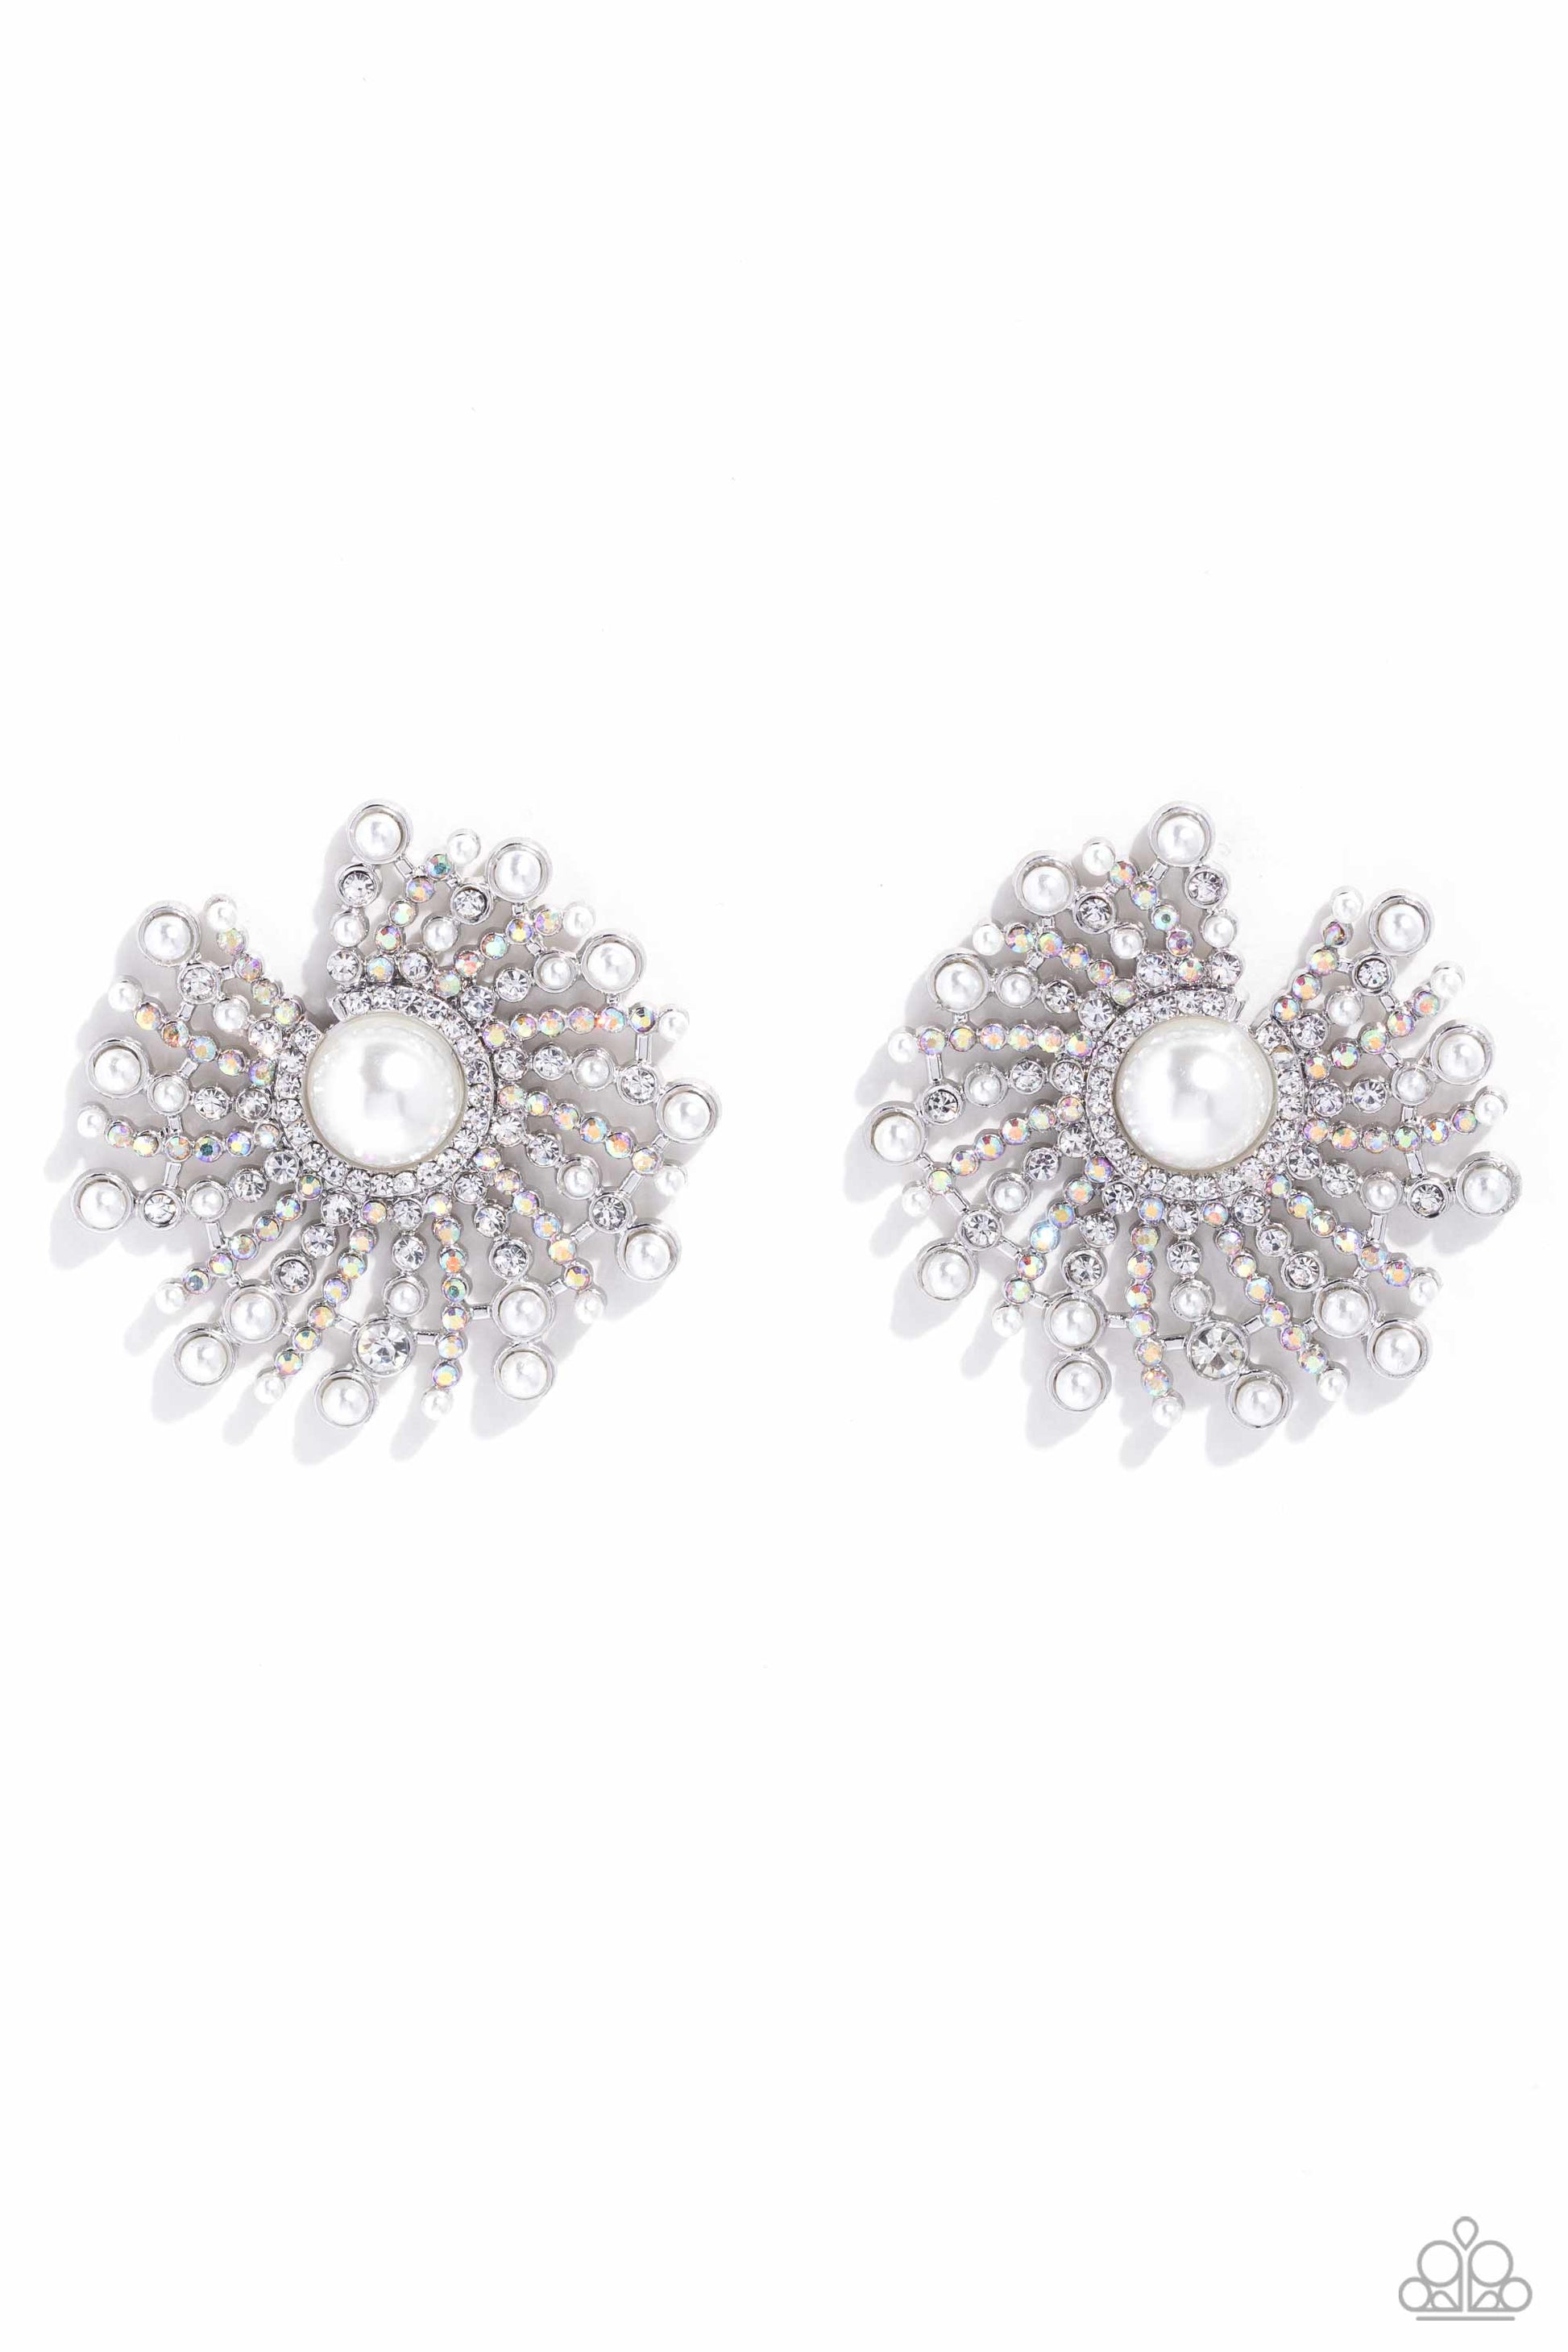 Paparazzi Accessories - Fancy Fireworks - December 2023 Life of the Party White Earrings shimmery strands of silver spin out from a white pearly center, creating an exaggerated firework-like display at the ear. An explosion of dainty iridescent rhinestones, dainty white pearls, and white rhinestones lines the swirls and curves of the shimmery display, creating an eye-catching display. Earring attaches to a standard post fitting. Due to its prismatic palette, color may vary.